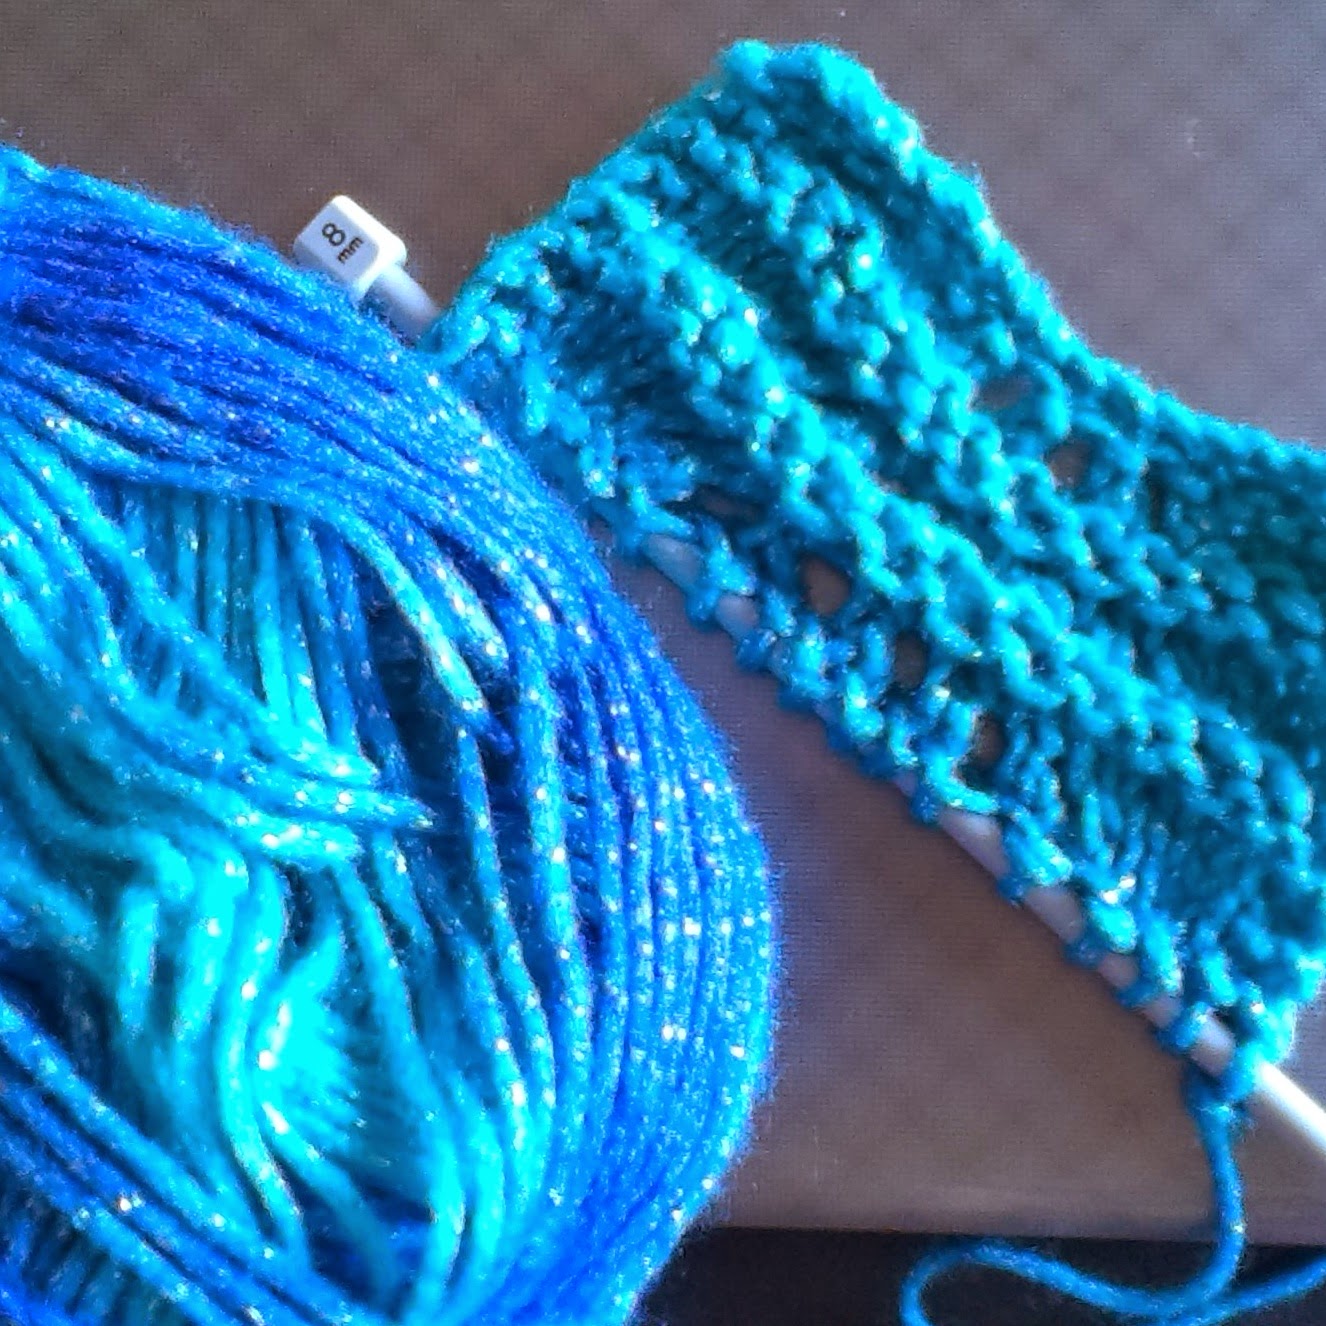 Starting to knit a scarf